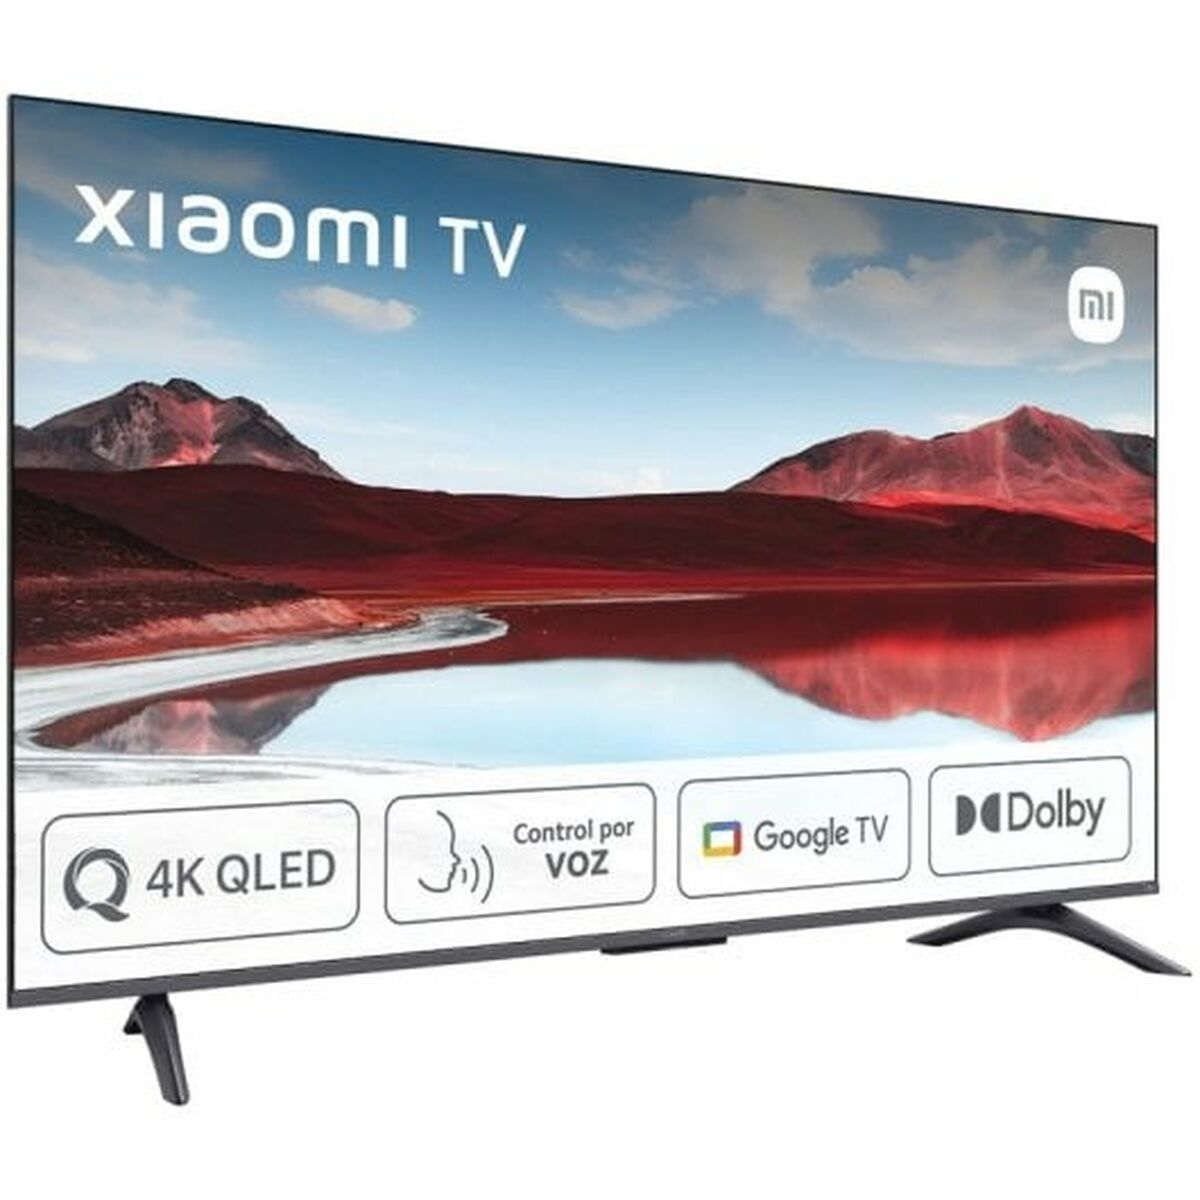 Smart TV Xiaomi A PRO 2025 65" 4K Ultra HD LED HDR QLED, Xiaomi, Electronics, TV, Video and home cinema, smart-tv-xiaomi-a-pro-2025-65-4k-ultra-hd-led-hdr-qled, Brand_Xiaomi, category-reference-2609, category-reference-2625, category-reference-2931, category-reference-t-18805, category-reference-t-18827, category-reference-t-19653, cinema and television, Condition_NEW, entertainment, Price_600 - 700, RiotNook